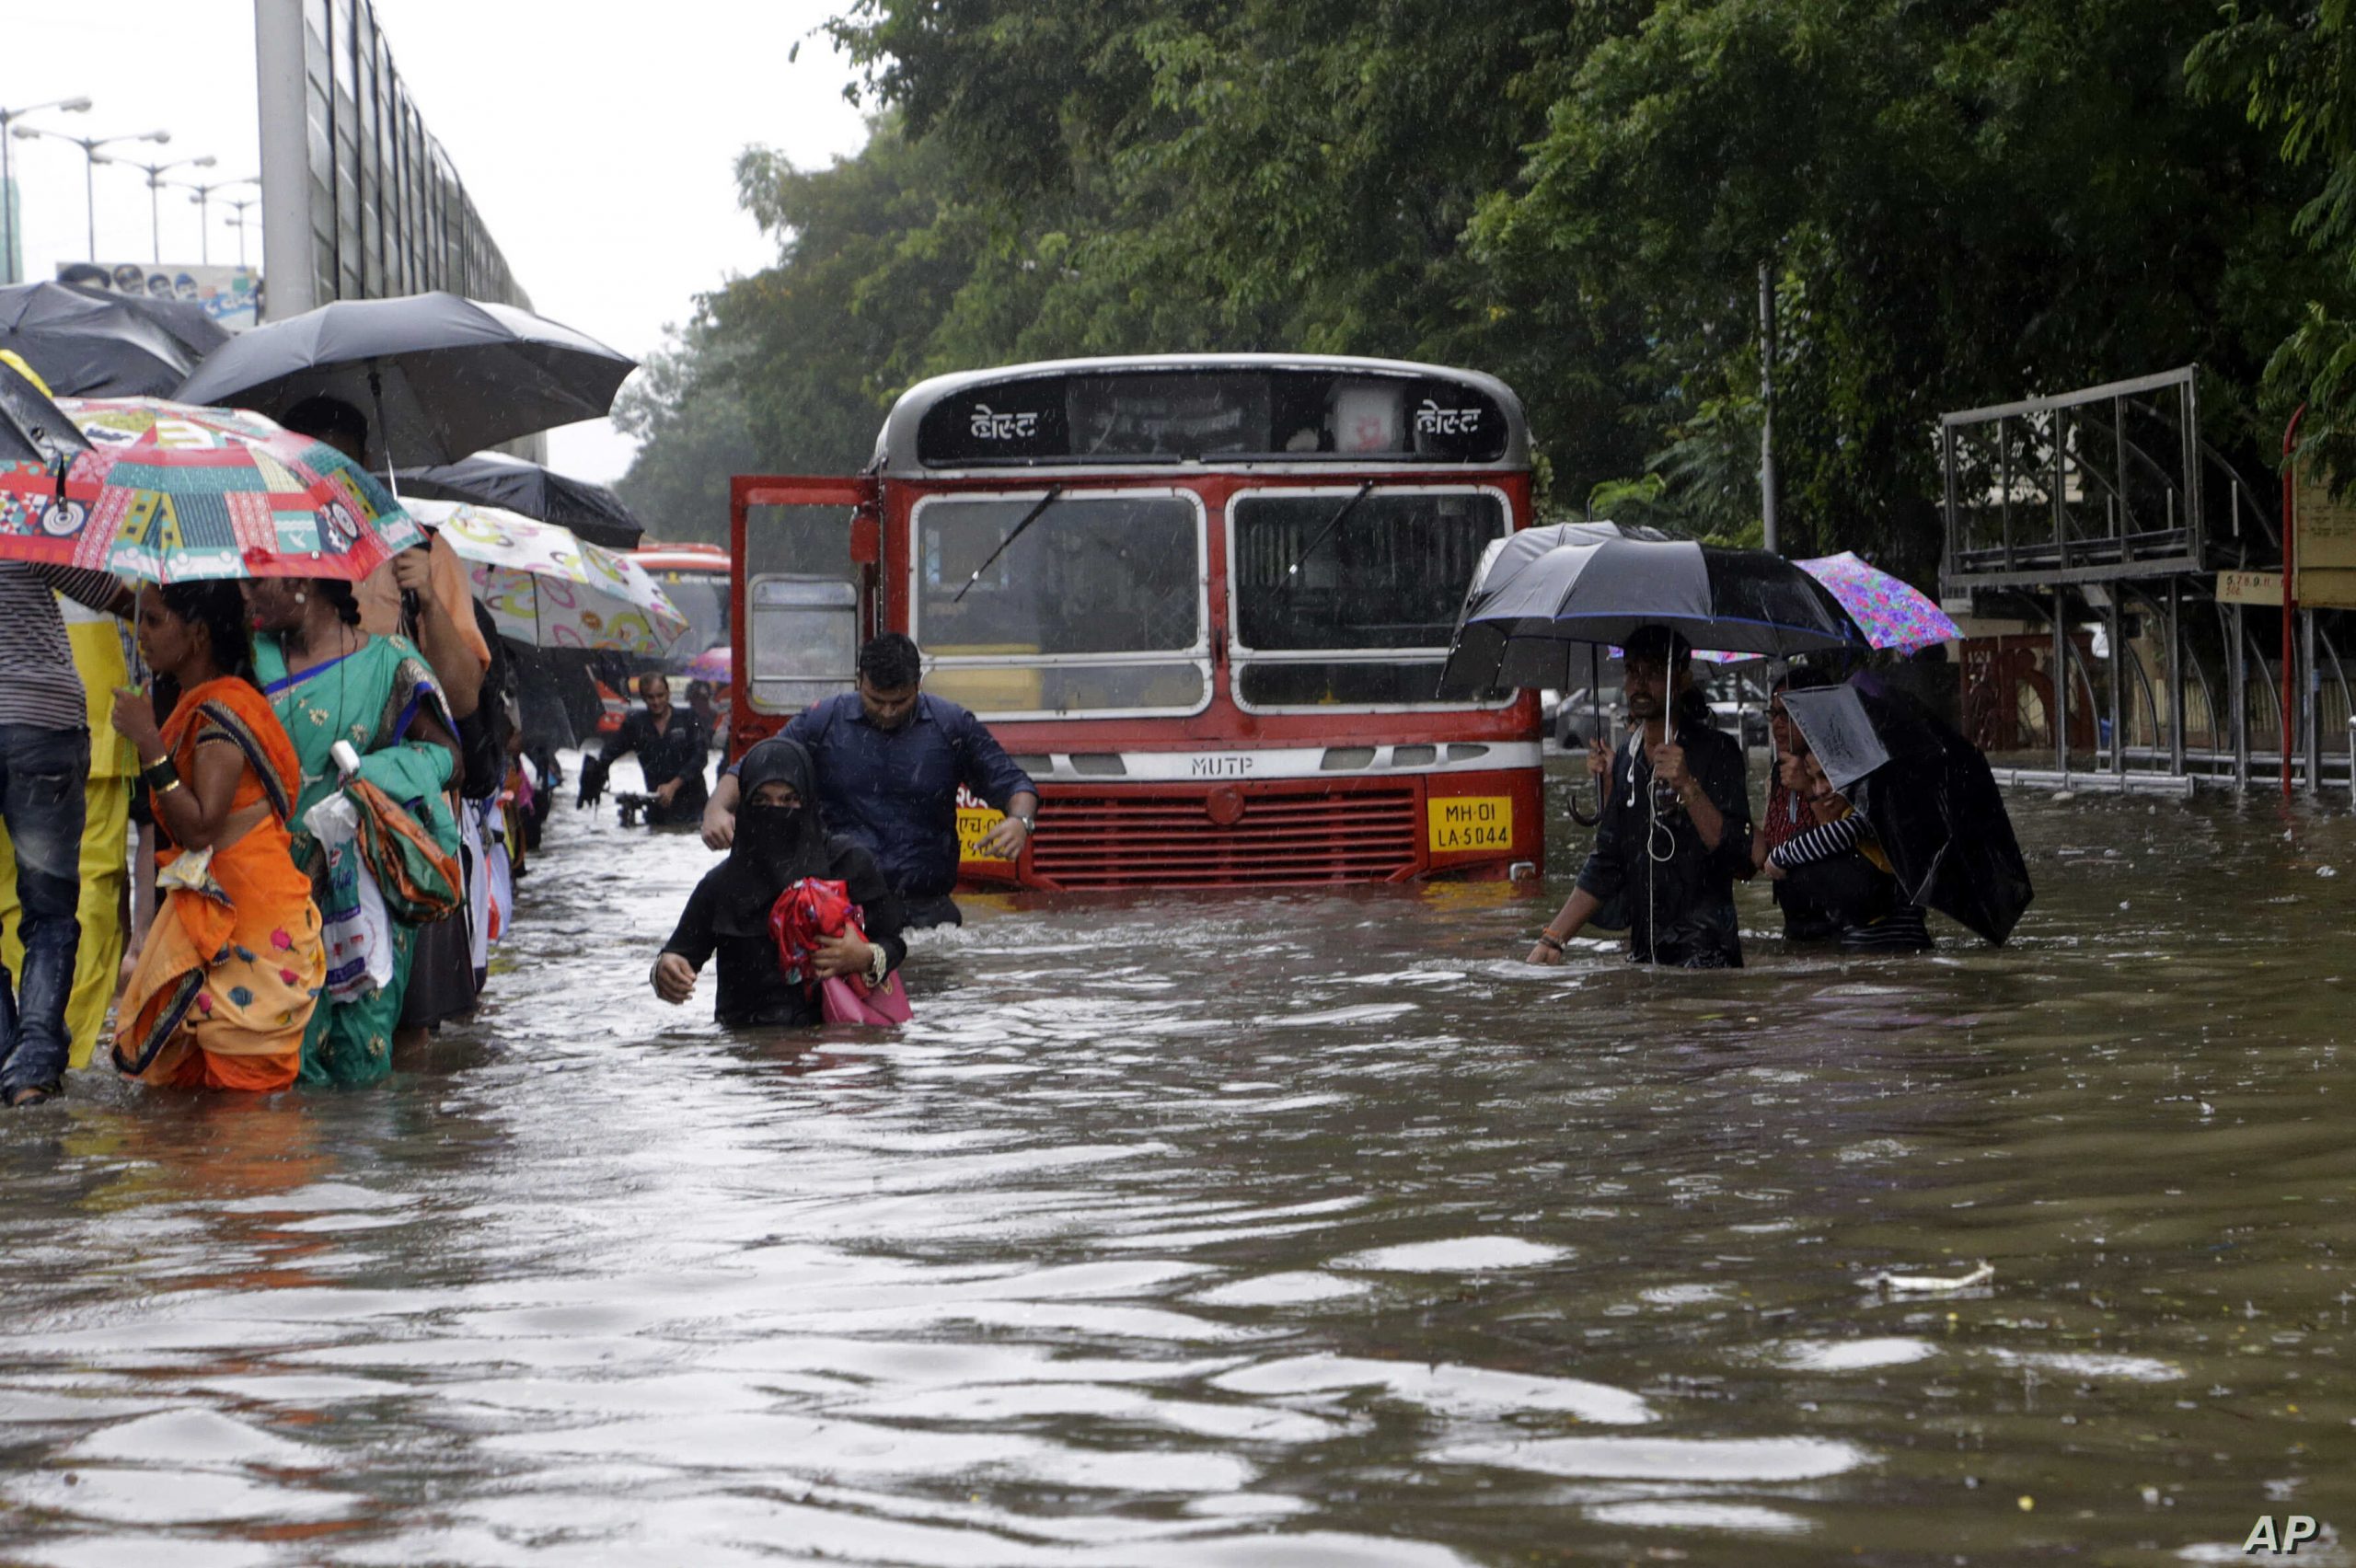 Mumbai Monsoon Global Warming And Threat Of Floods To The City